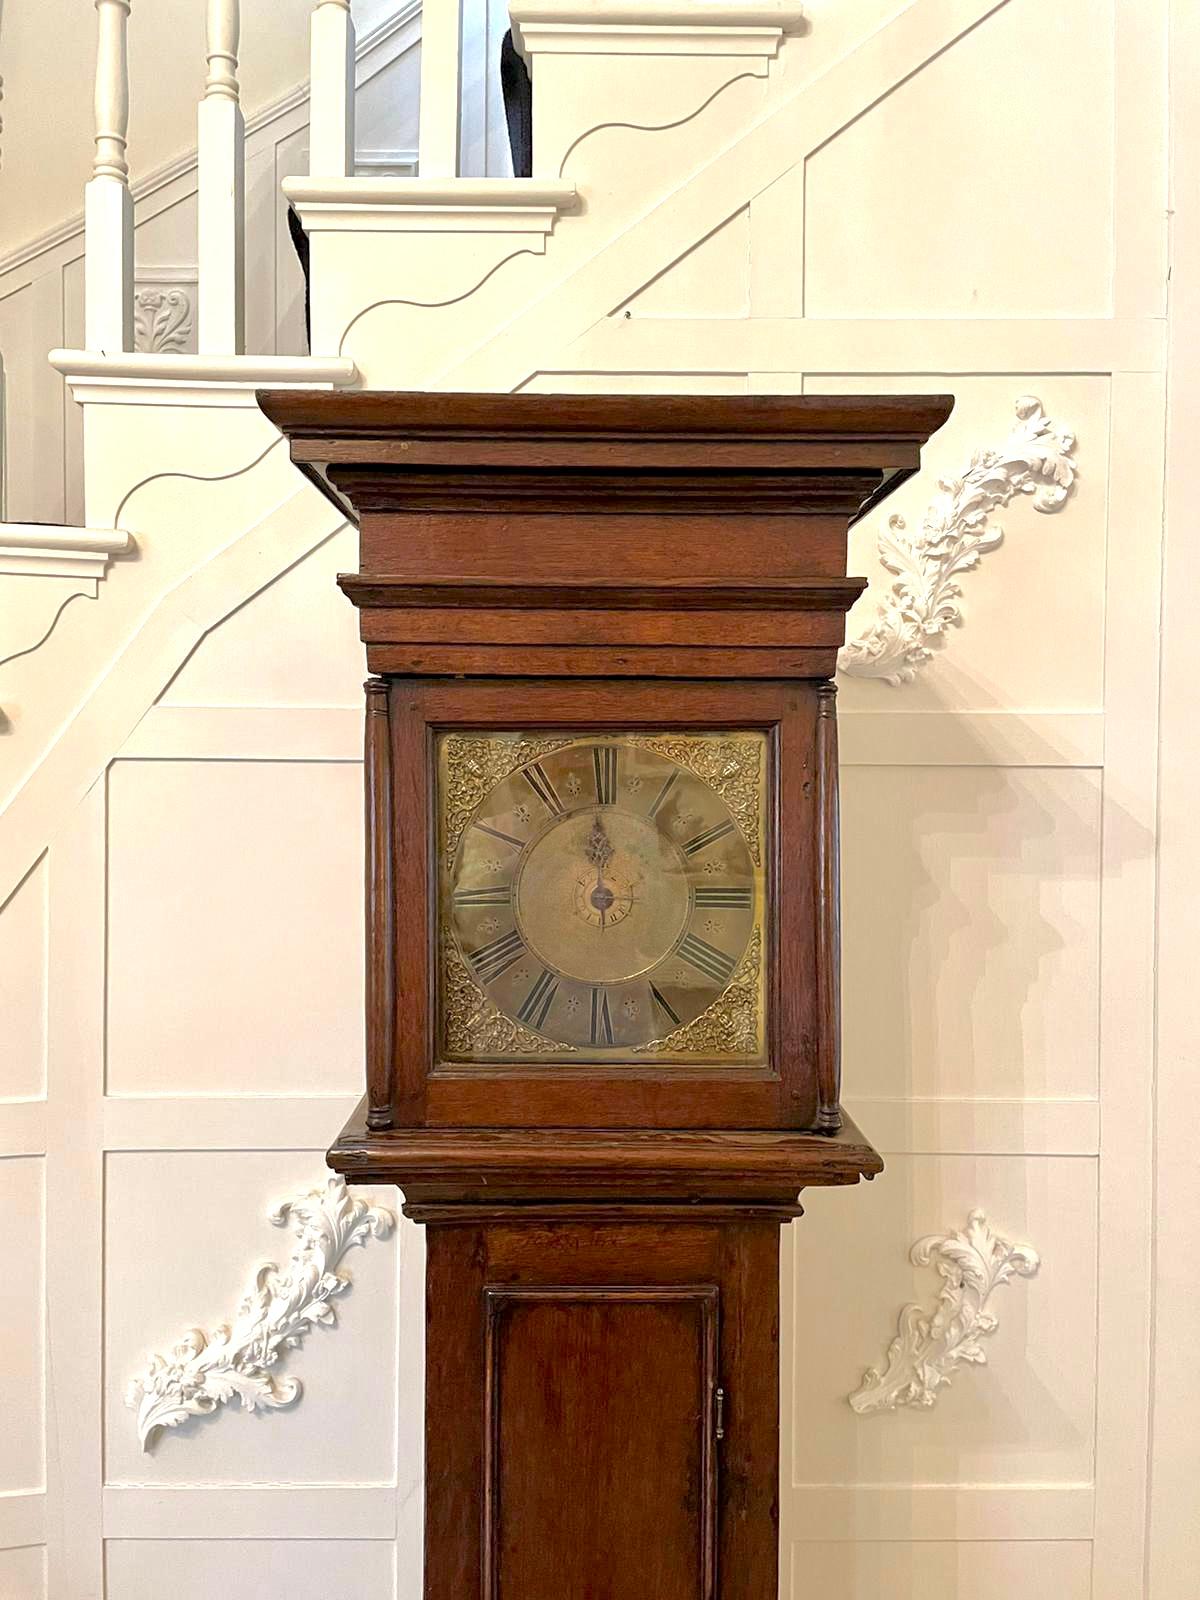 Rare Early 18th century brass face antique grandfather clock by Newman of Norwich having a stunning square brass face one hand and a thirty hour birdcage movement striking each hour on the original bell and featuring a rare alarm. It has the